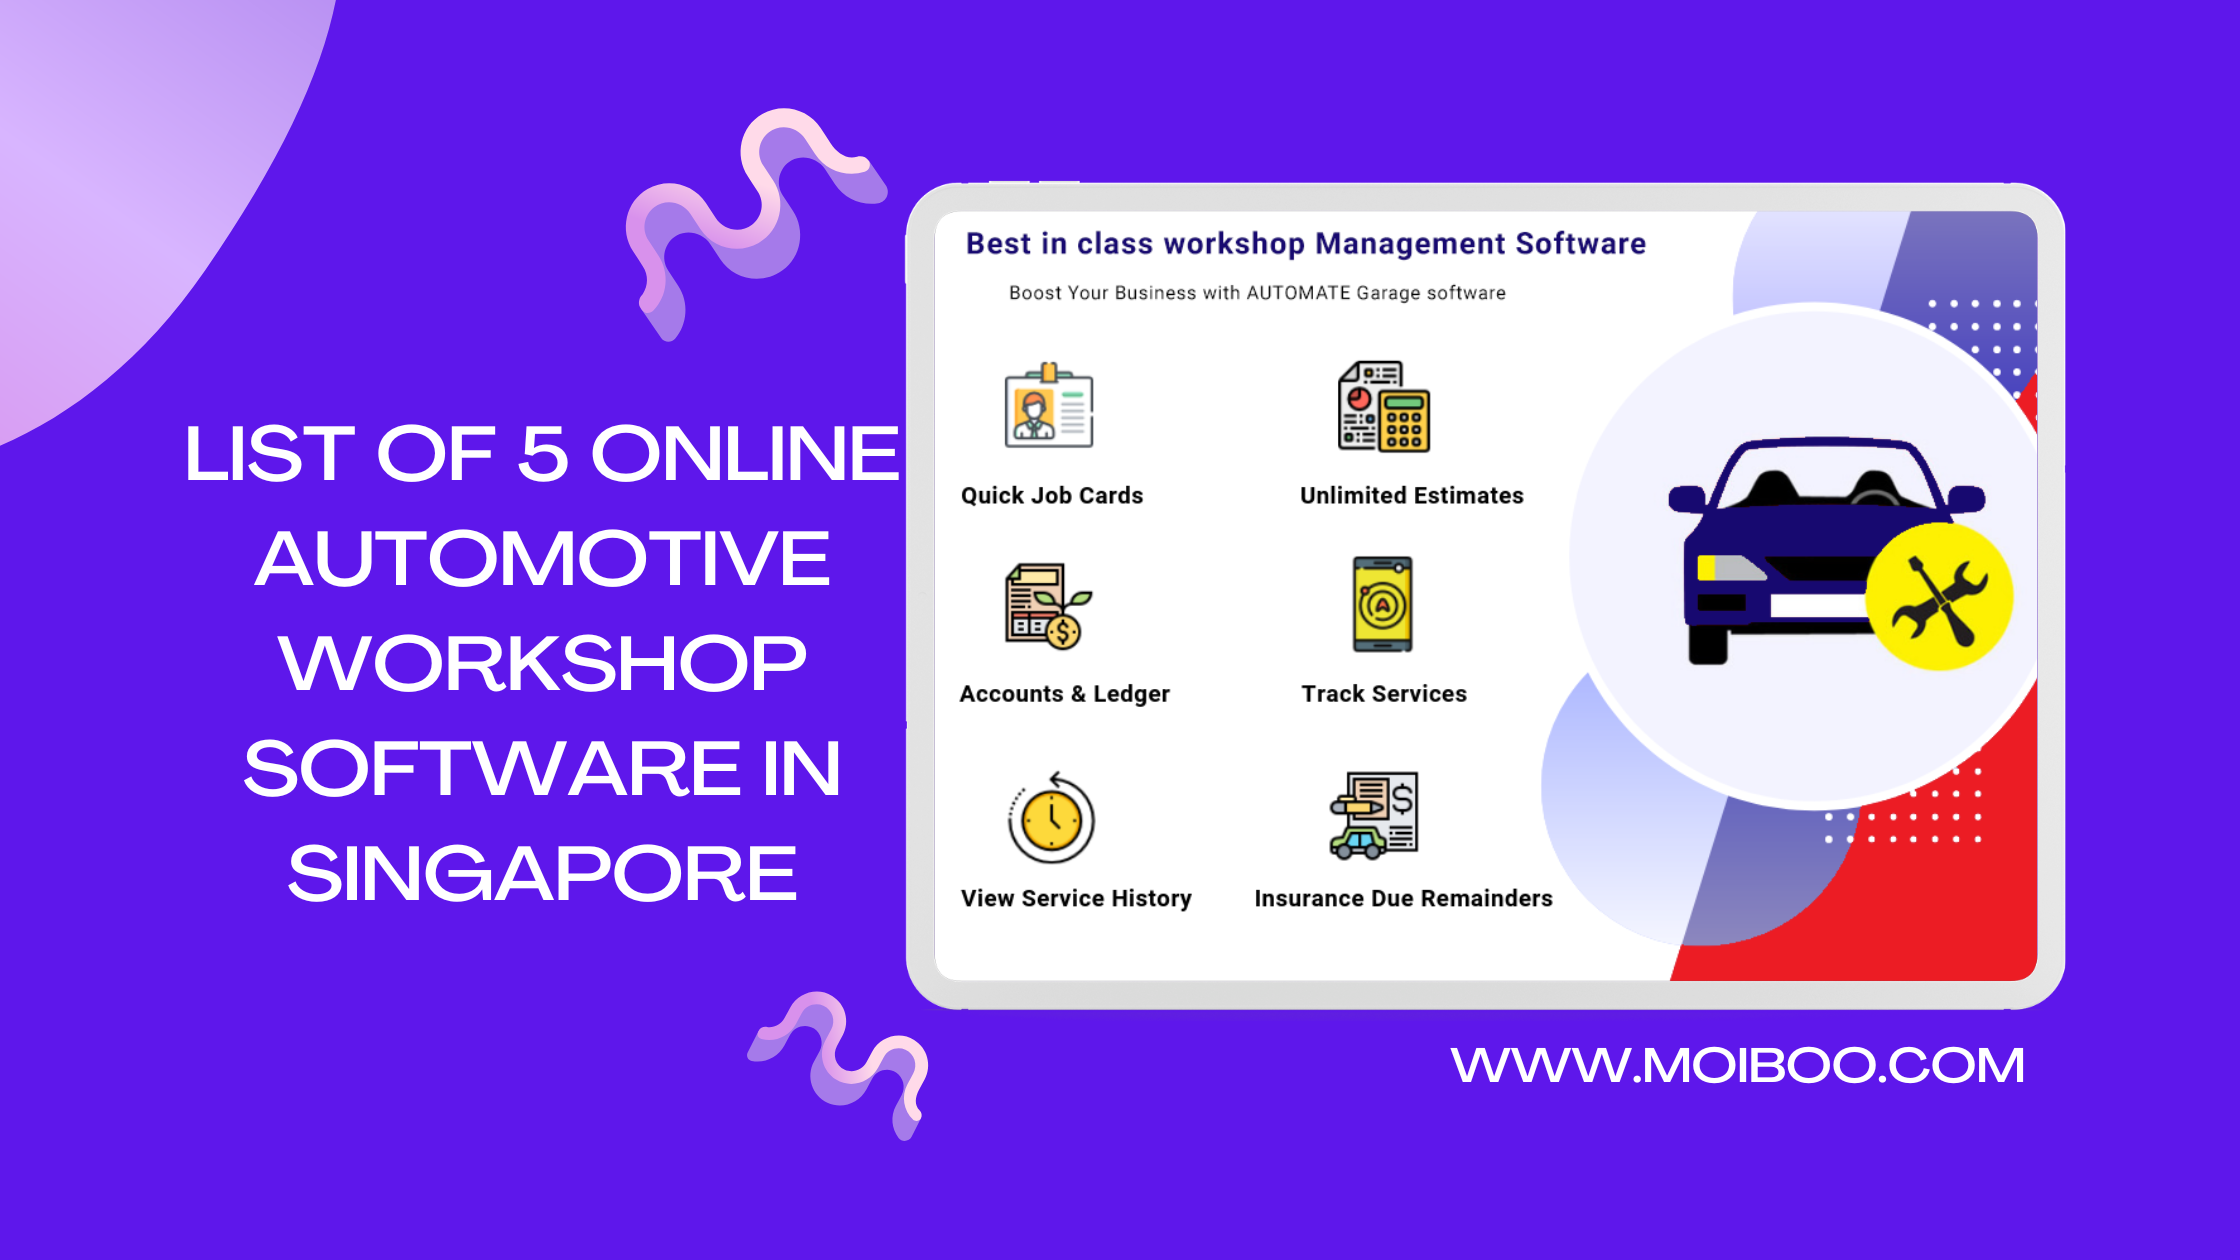 List of 5 Automotive Workshop Software in Singapore